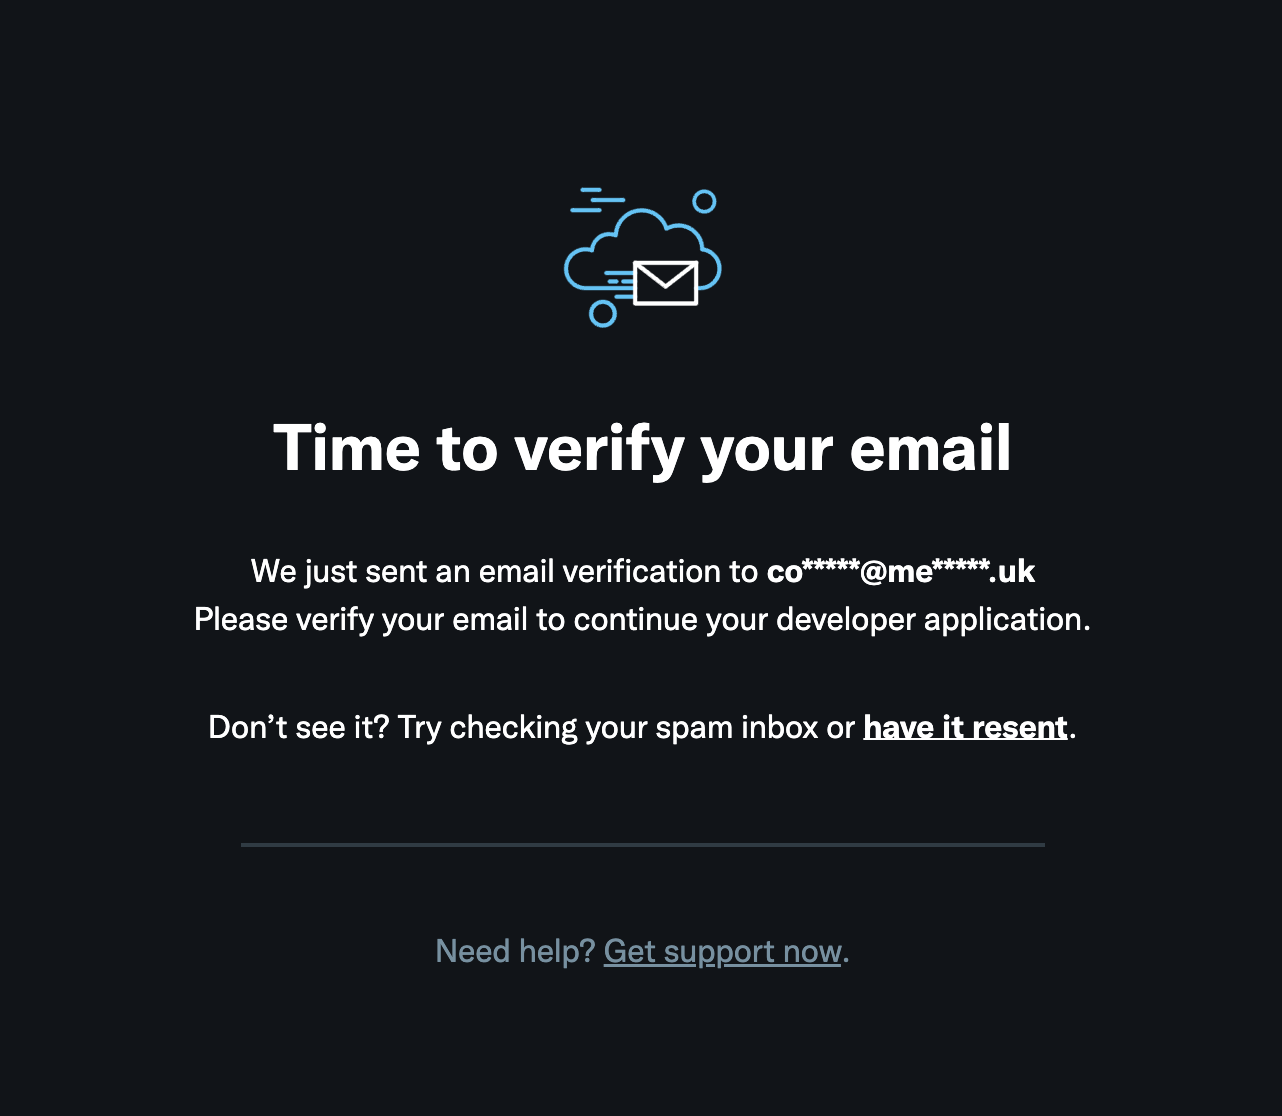 Confirmation screen says Time to verify your email and asks you to find the email in order to get in